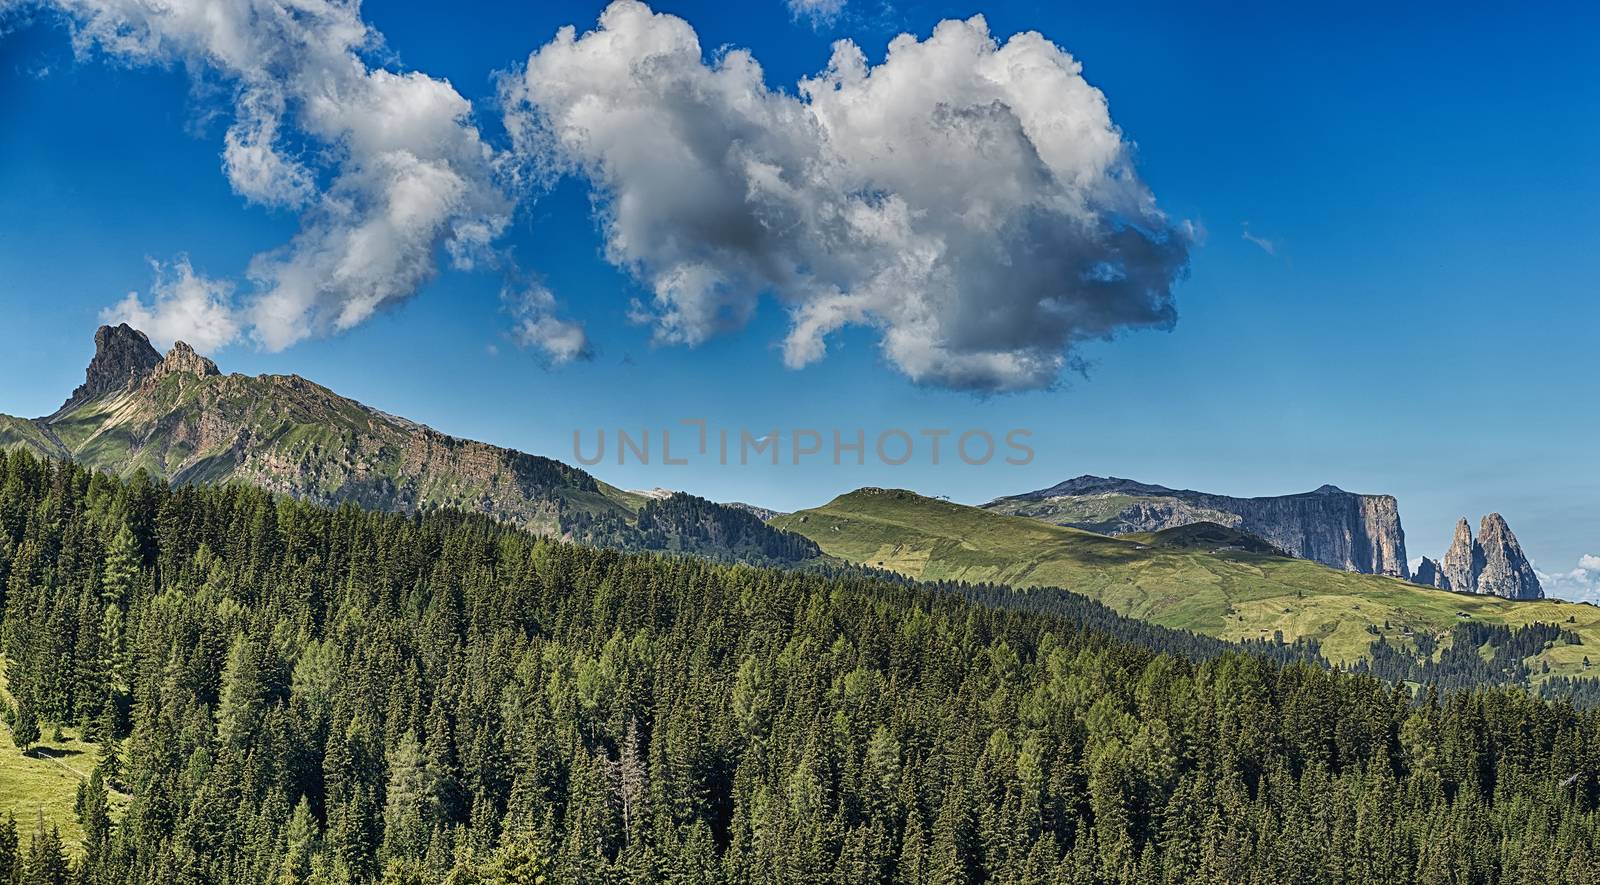 Landscape of the italian Alps by Mdc1970